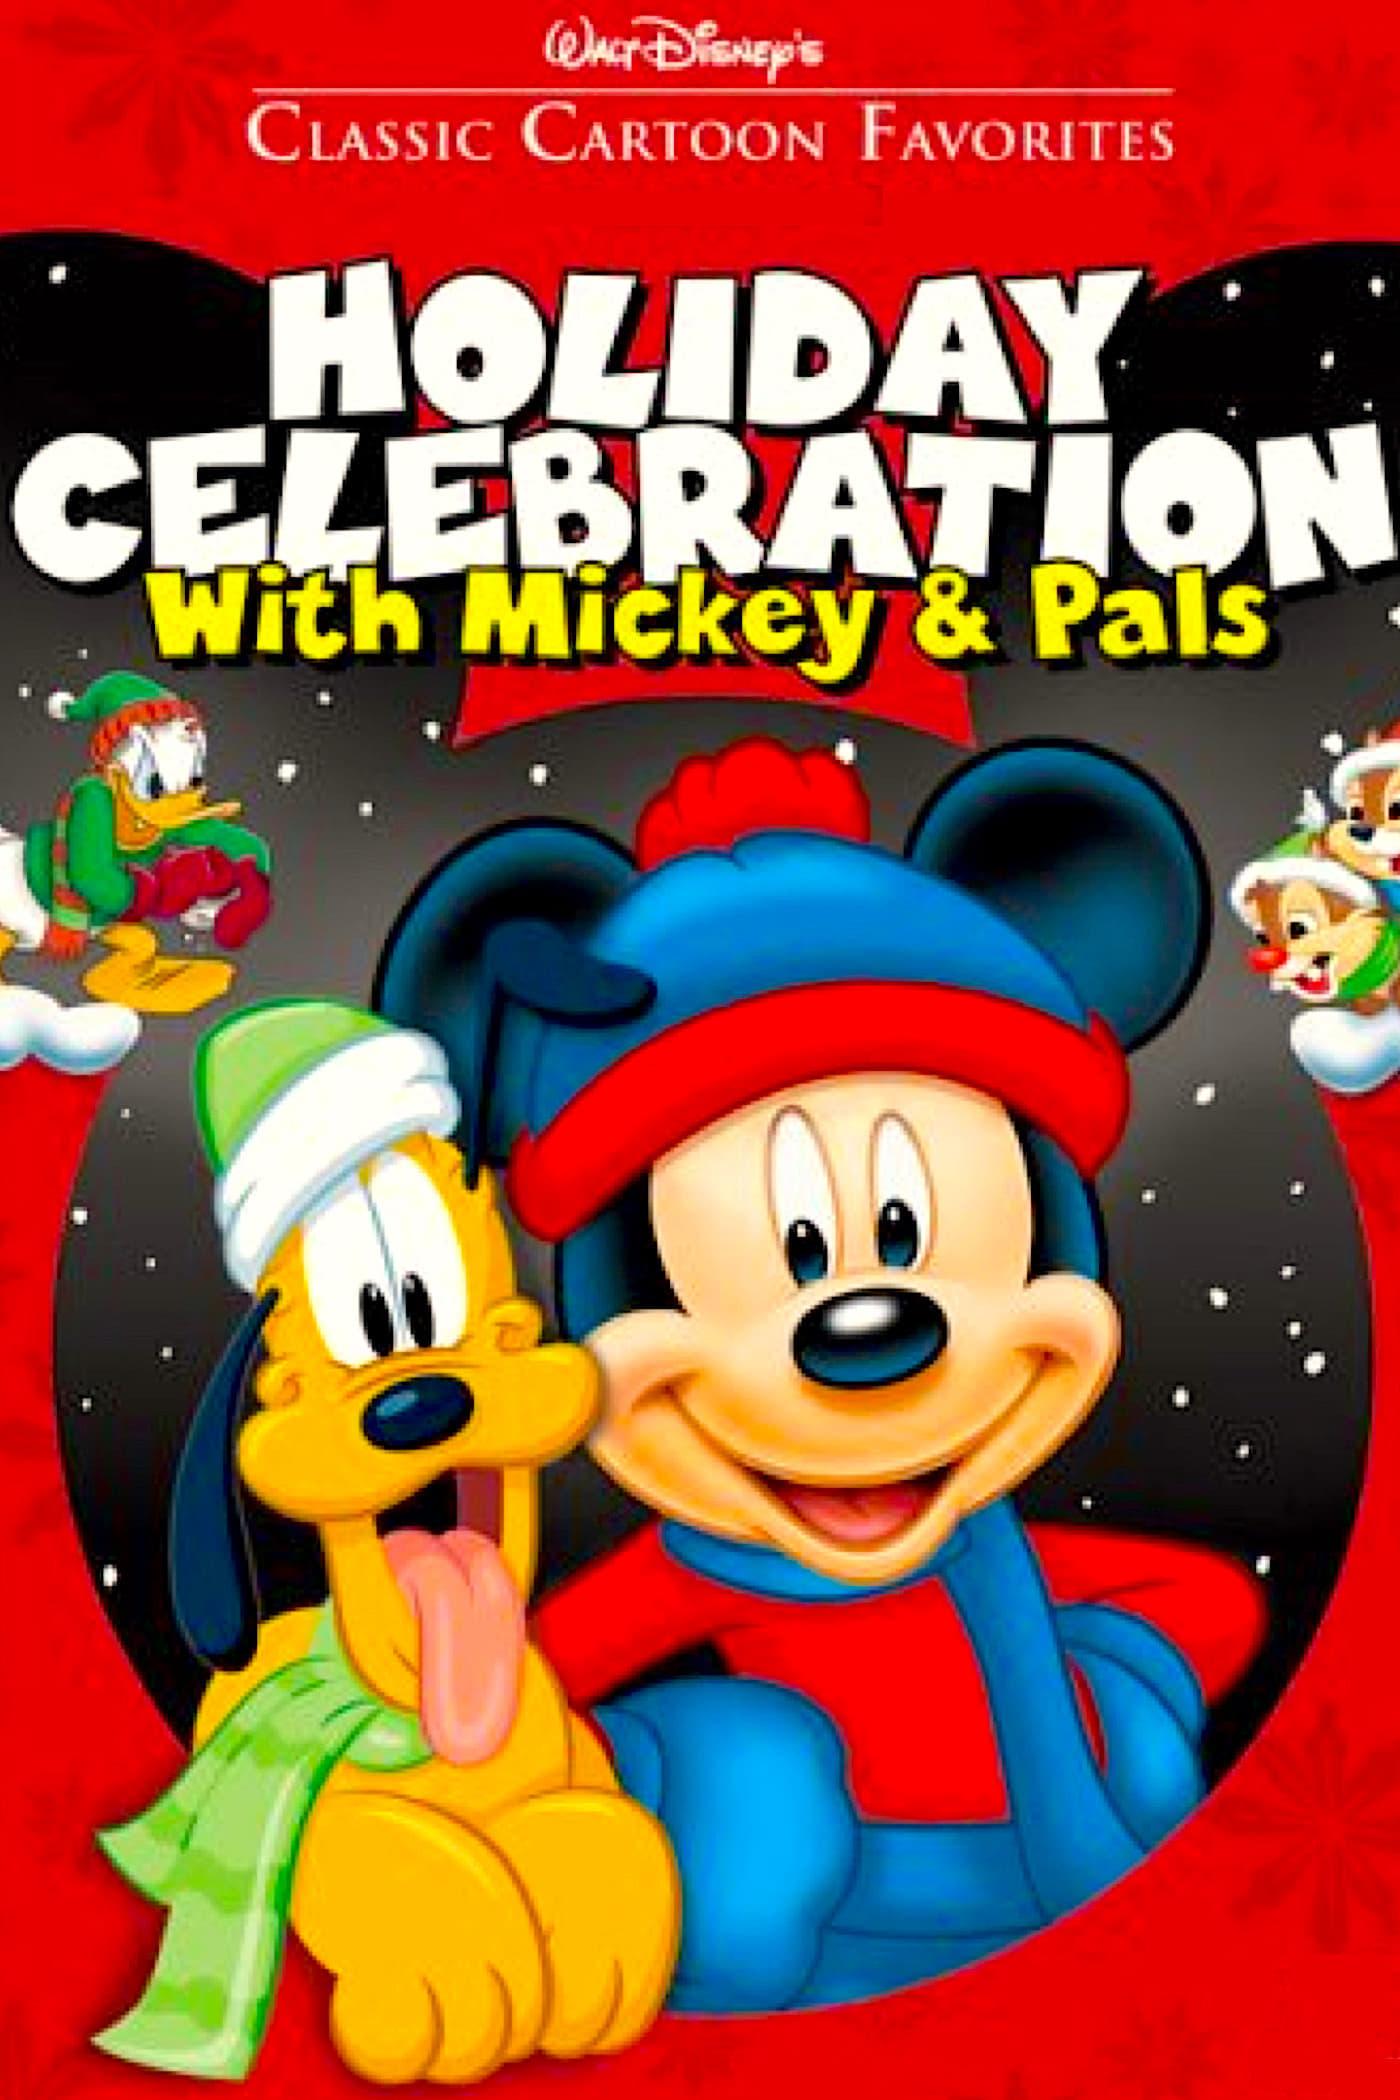 Classic Cartoon Favorites Volume 8: Holiday Celebration with Mickey and Pals poster